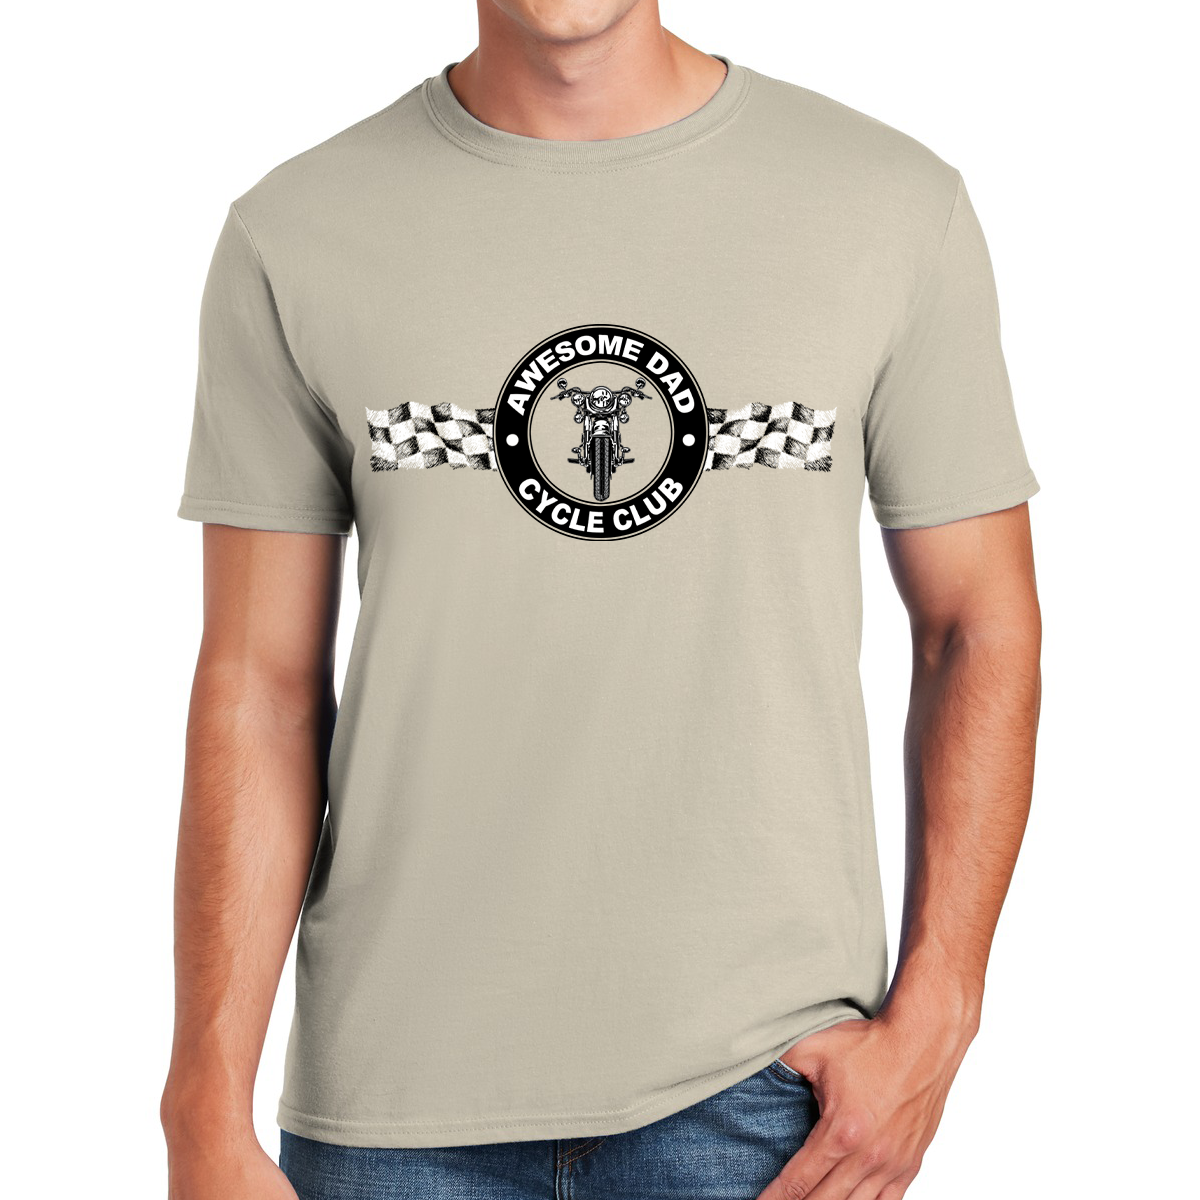 Biker Dad Riding With The Cycle Club Under The Checkered Flag Awesome Dad T-shirt